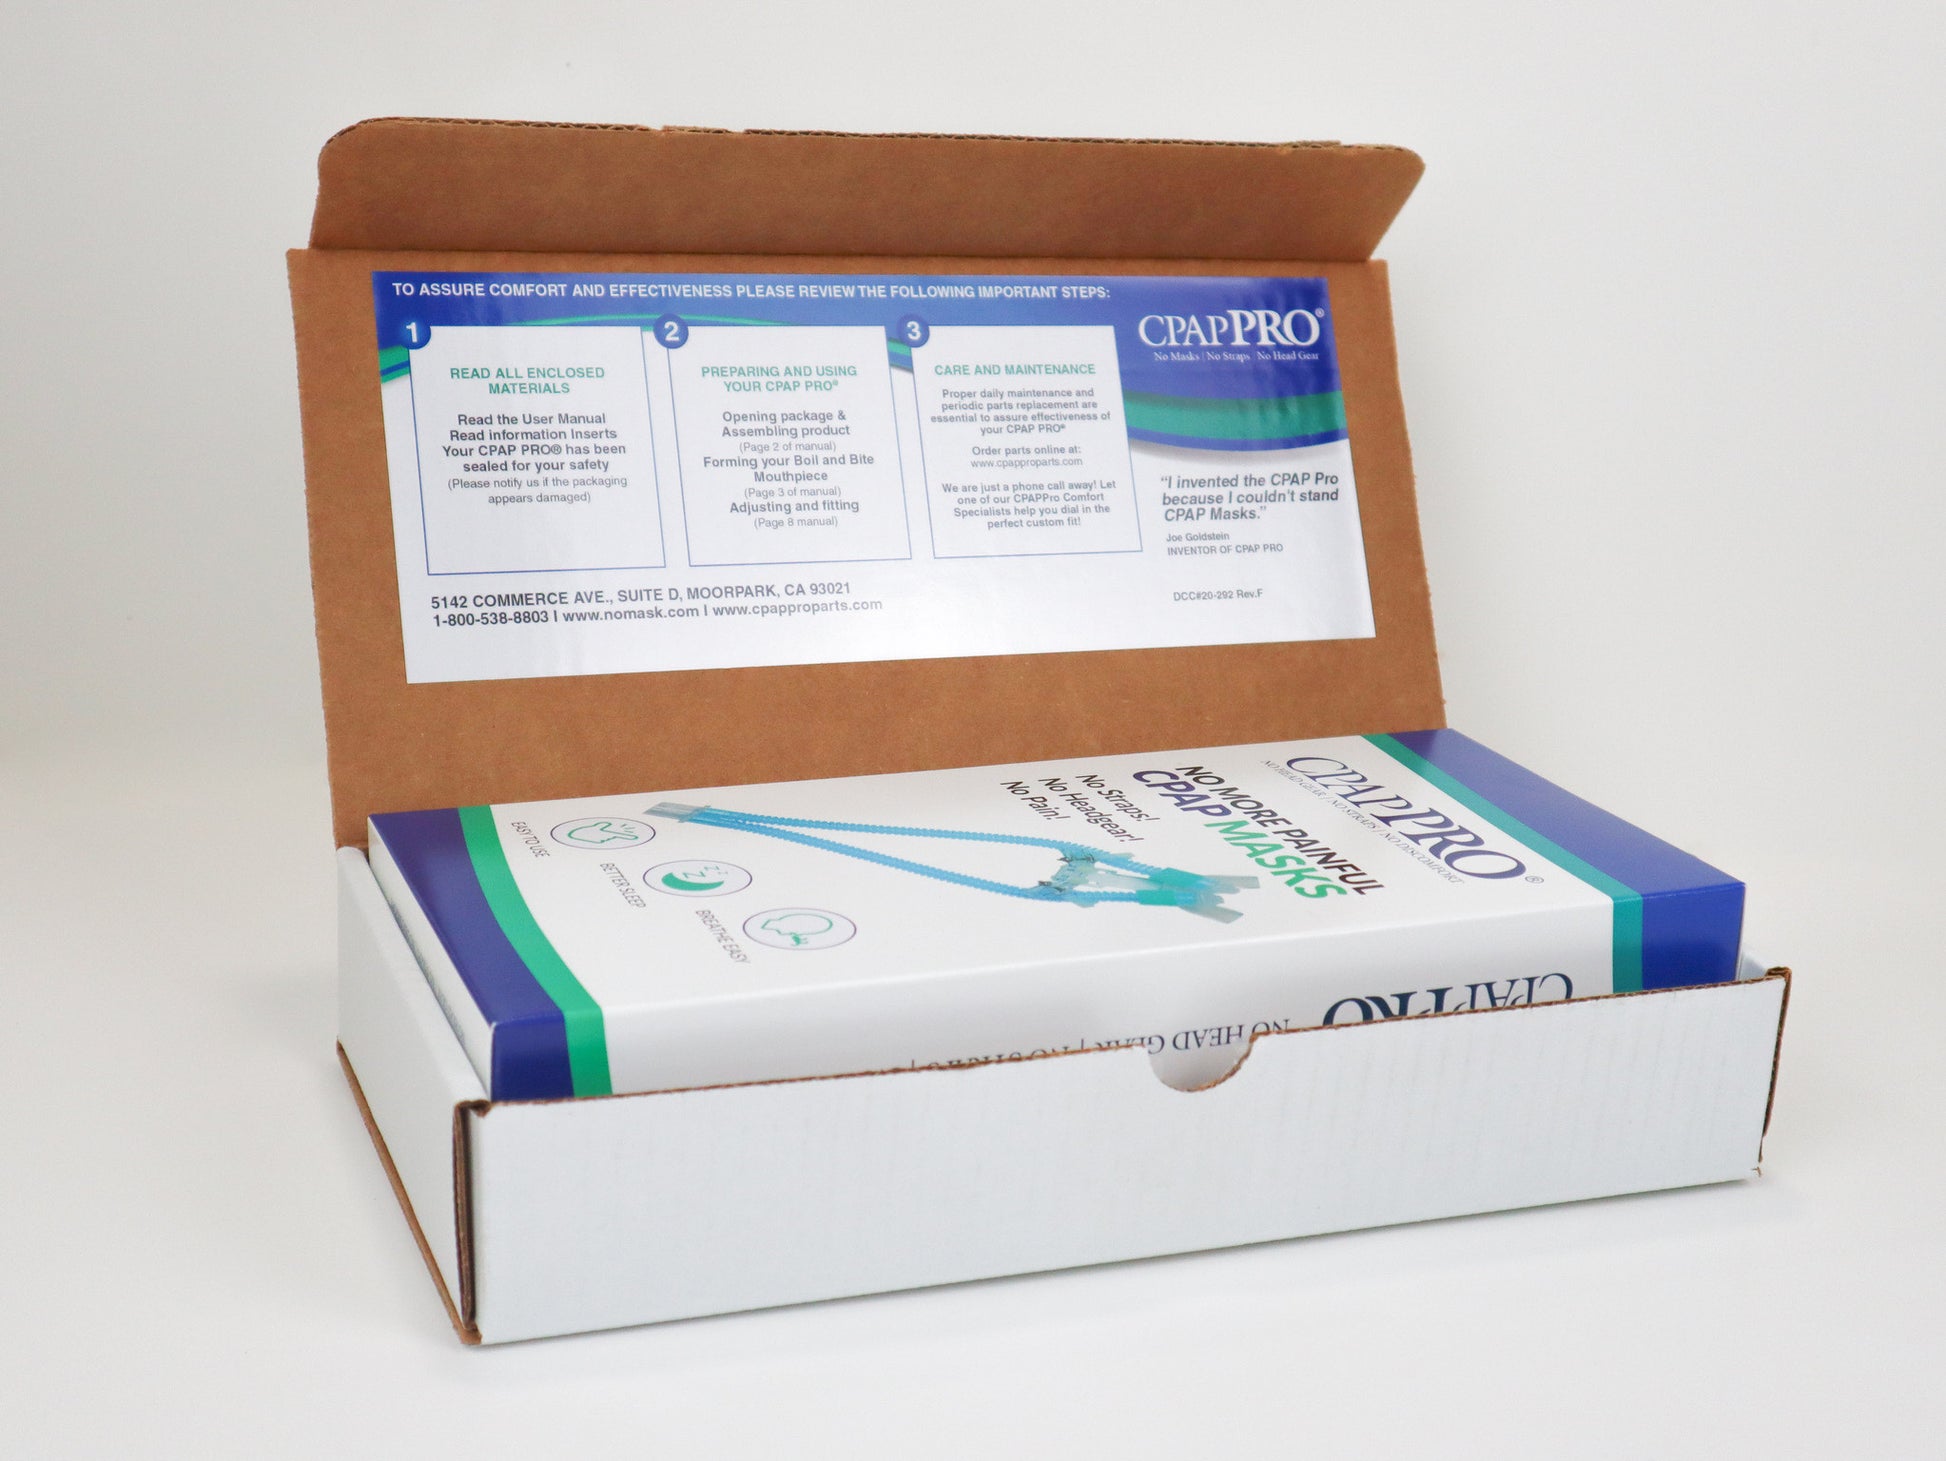 Cpap Pro packed box with product